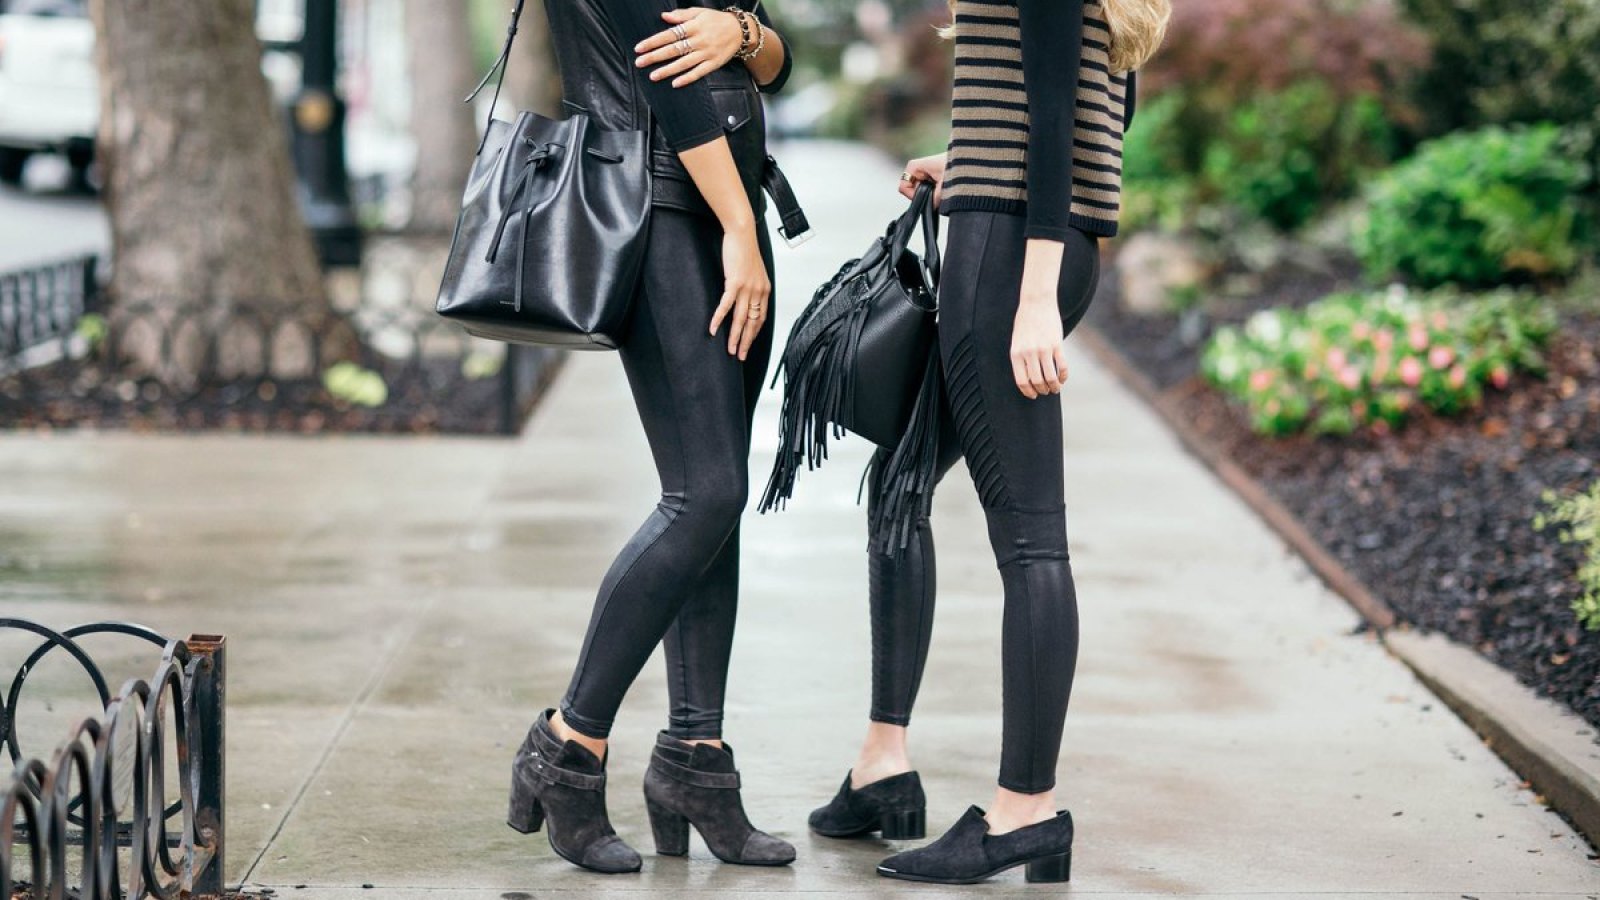 Shop Our Favorite Spanx Faux Leather Moto Leggings at Nordstrom